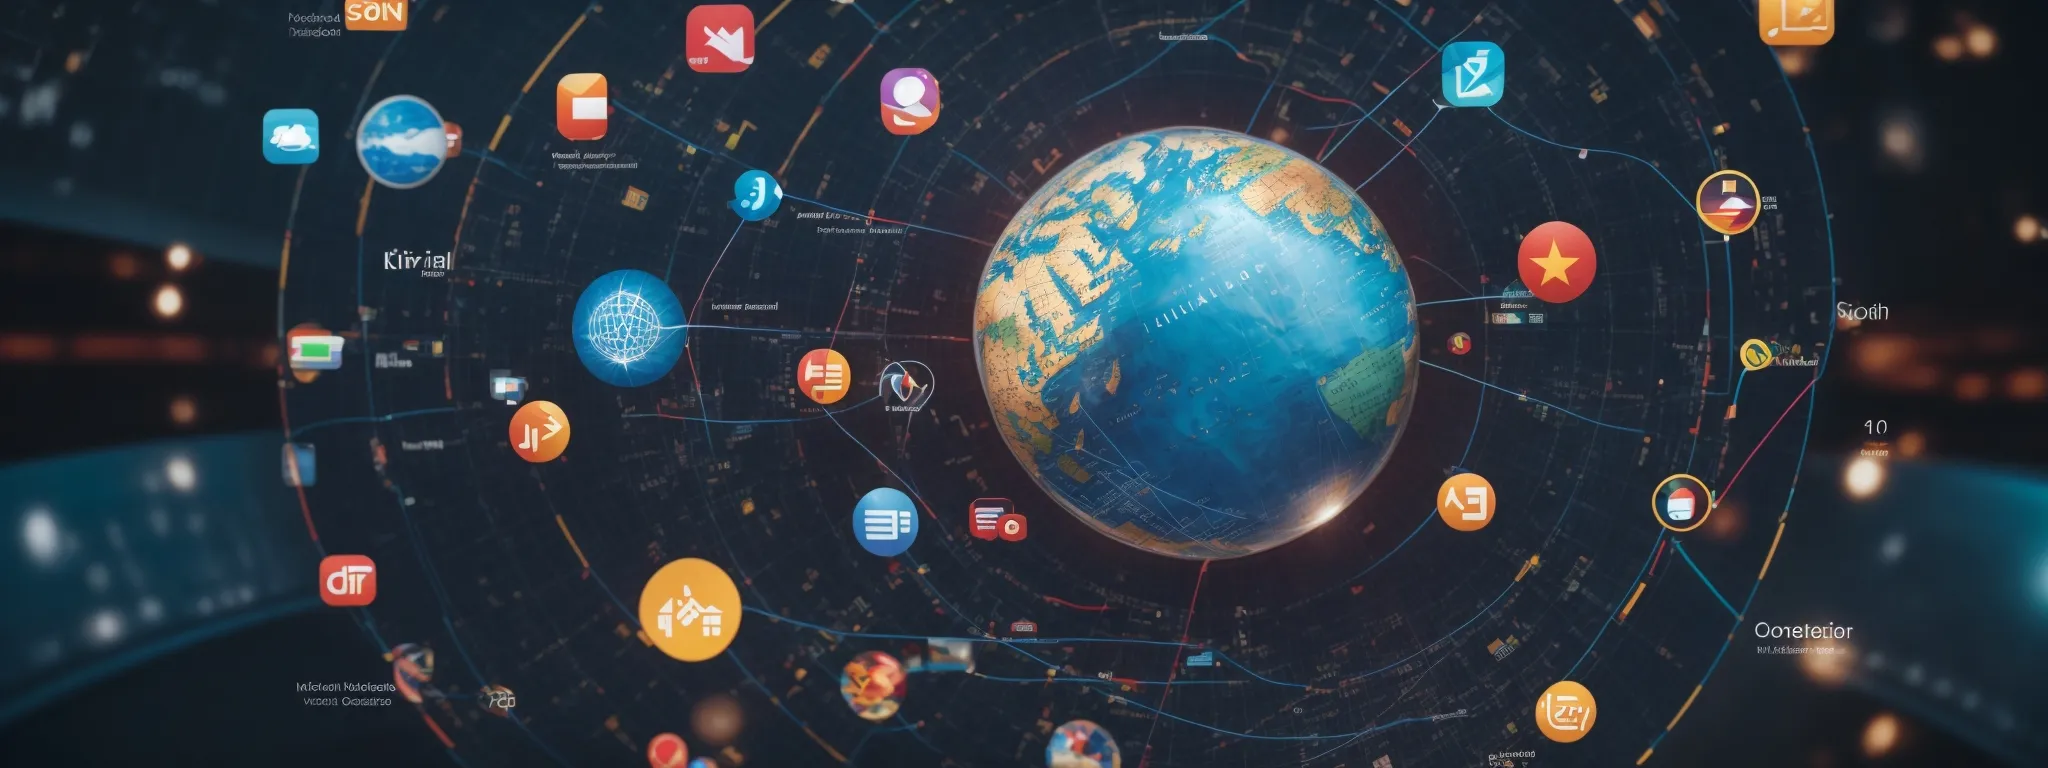 a globe surrounded by digitalized icons representing different search engines, with connecting lines symbolizing international seo strategies.